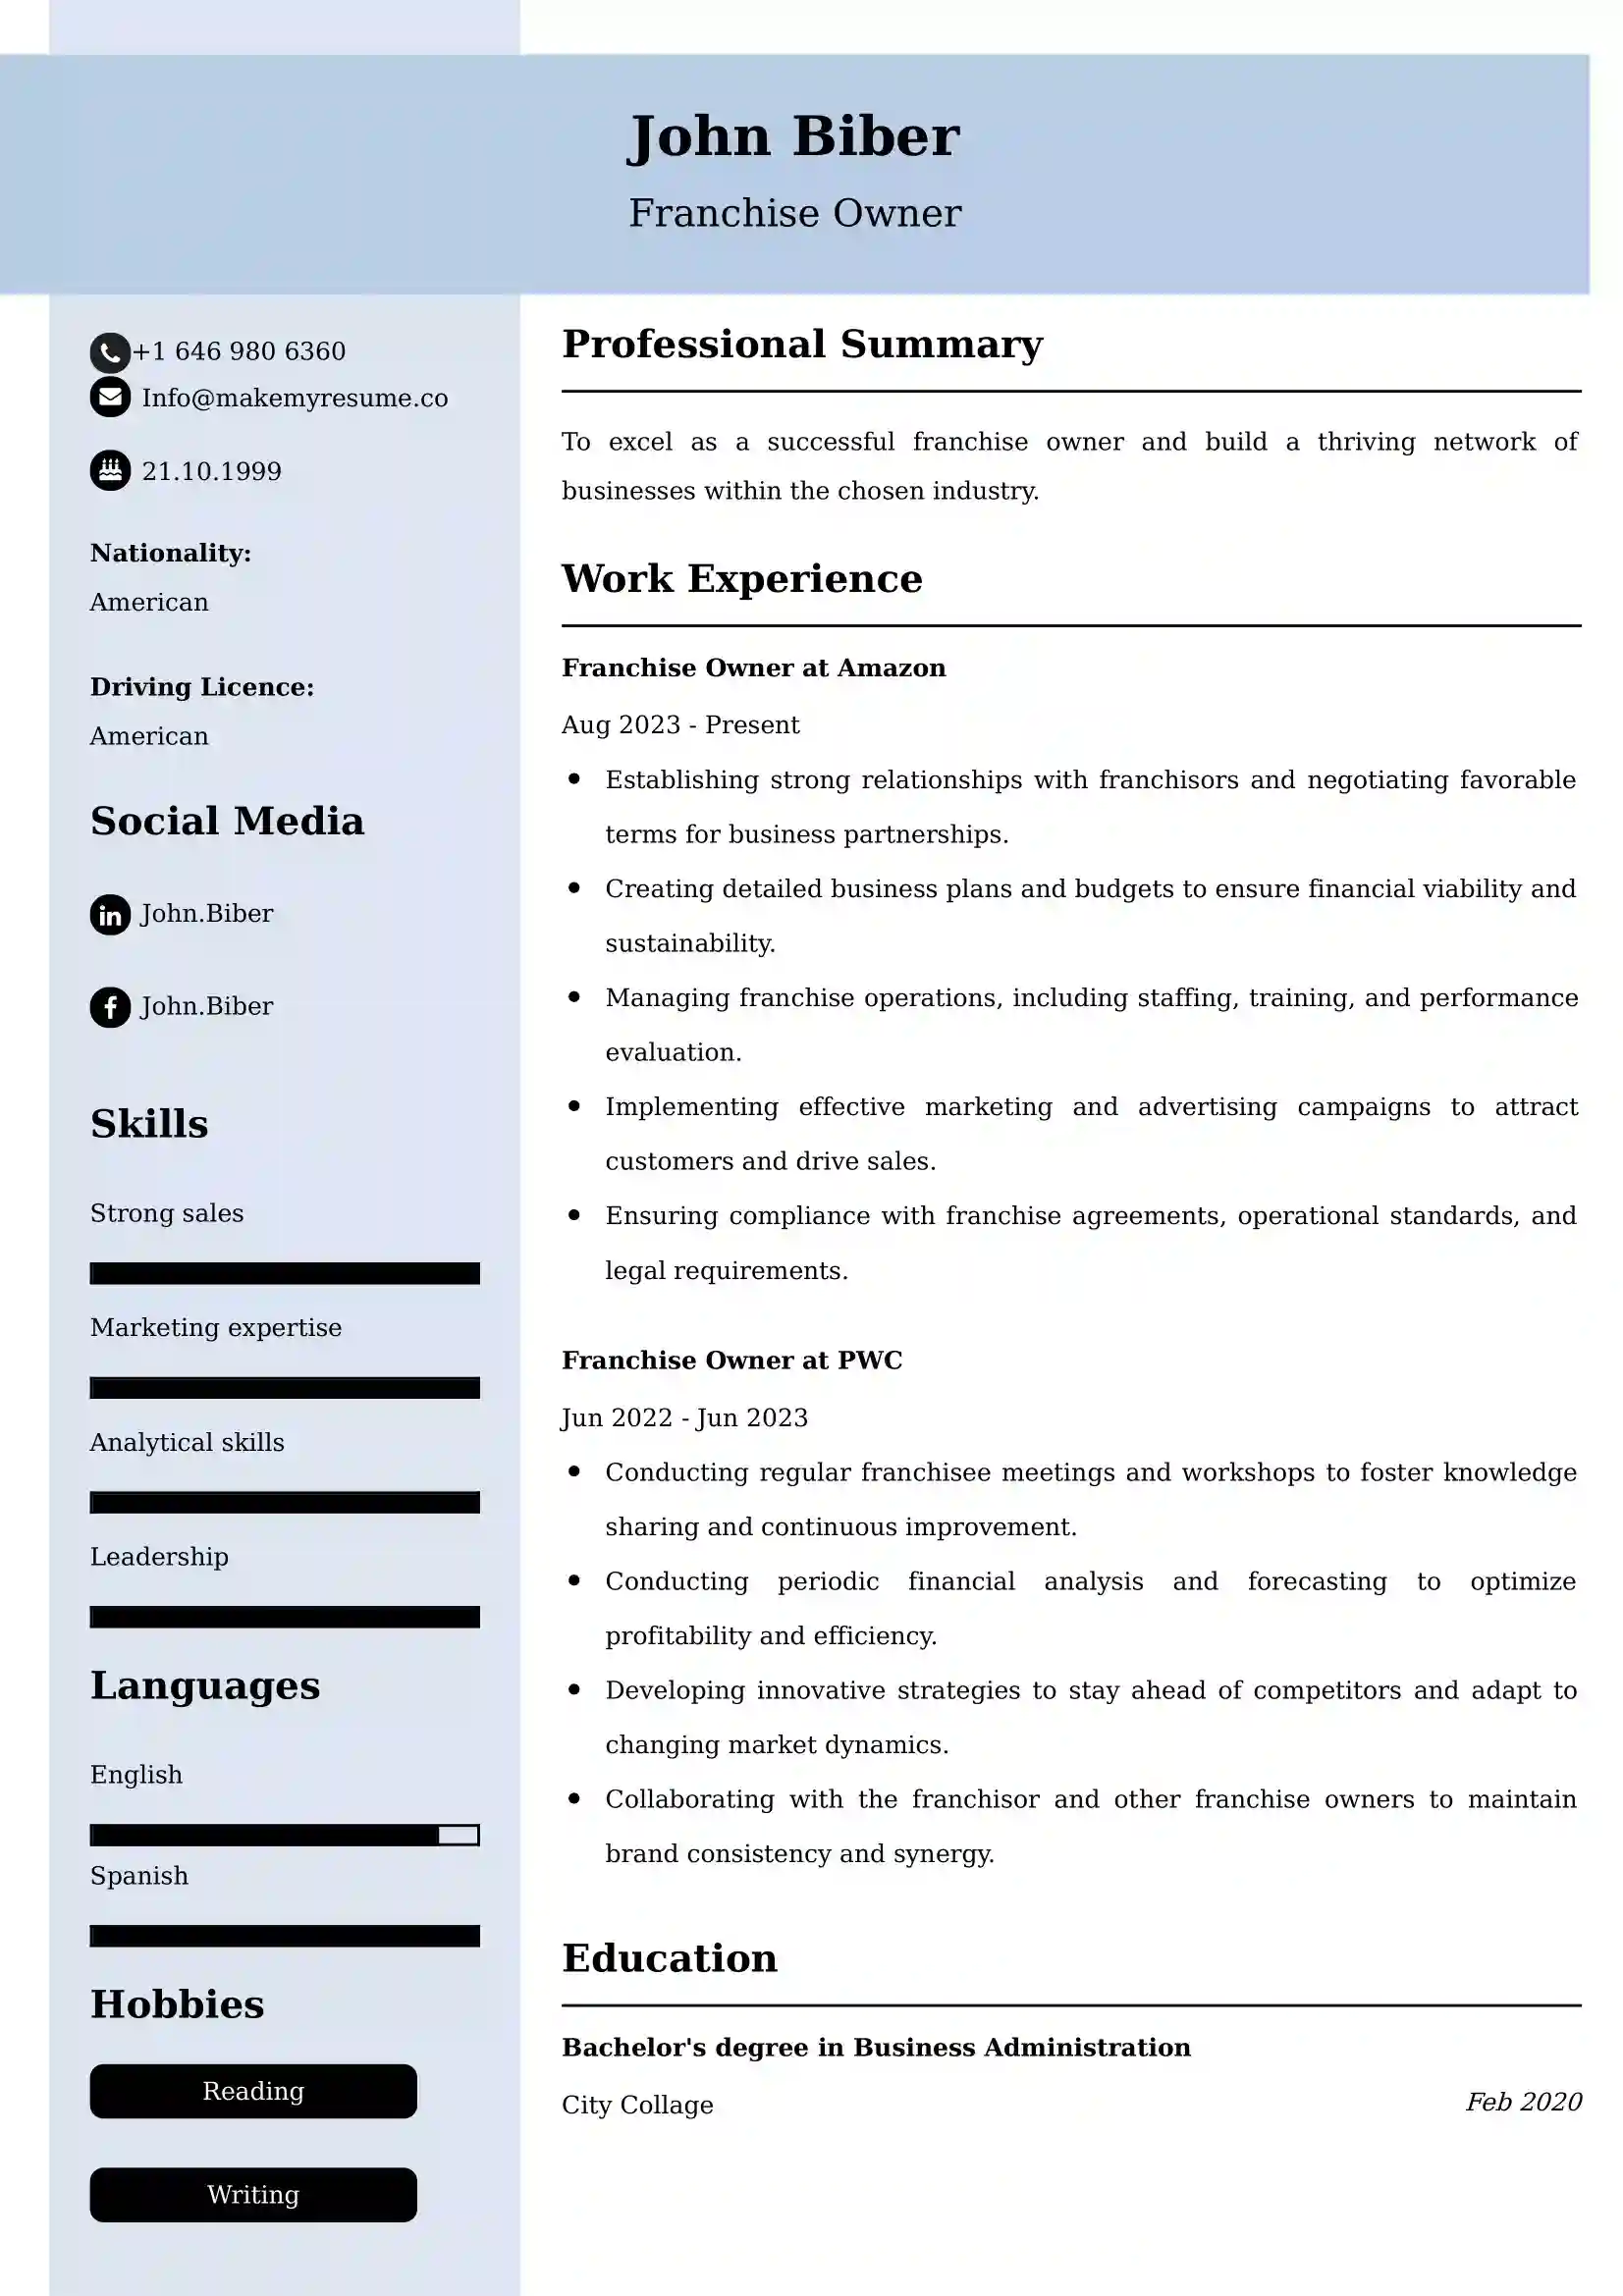 Franchise Owner Resume Examples - UK Format, Latest Template.